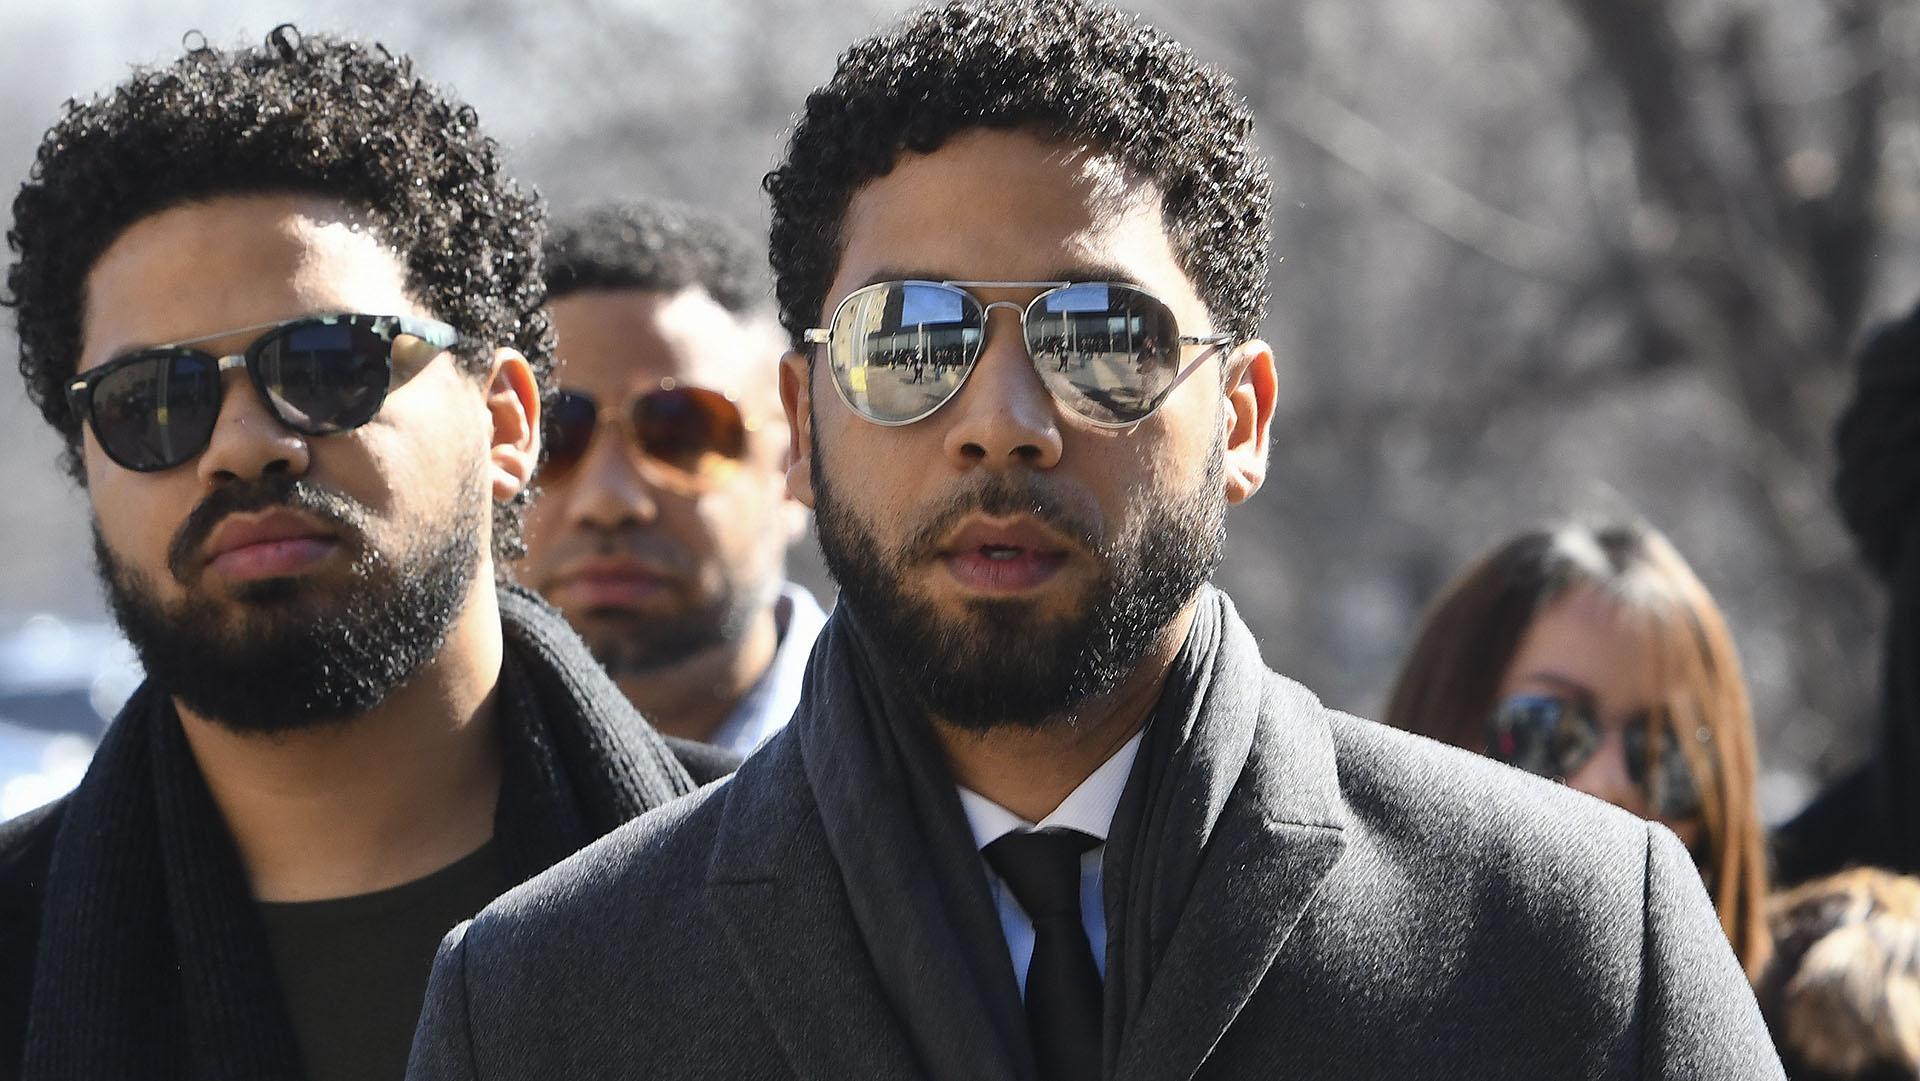 “Empire” actor Jussie Smollett, center, arrives at Leighton Criminal Court Building for a hearing to discuss whether cameras will be allowed in the courtroom during his disorderly conduct case on Tuesday, March 12, 2019, in Chicago. (AP Photo / Matt Marton)